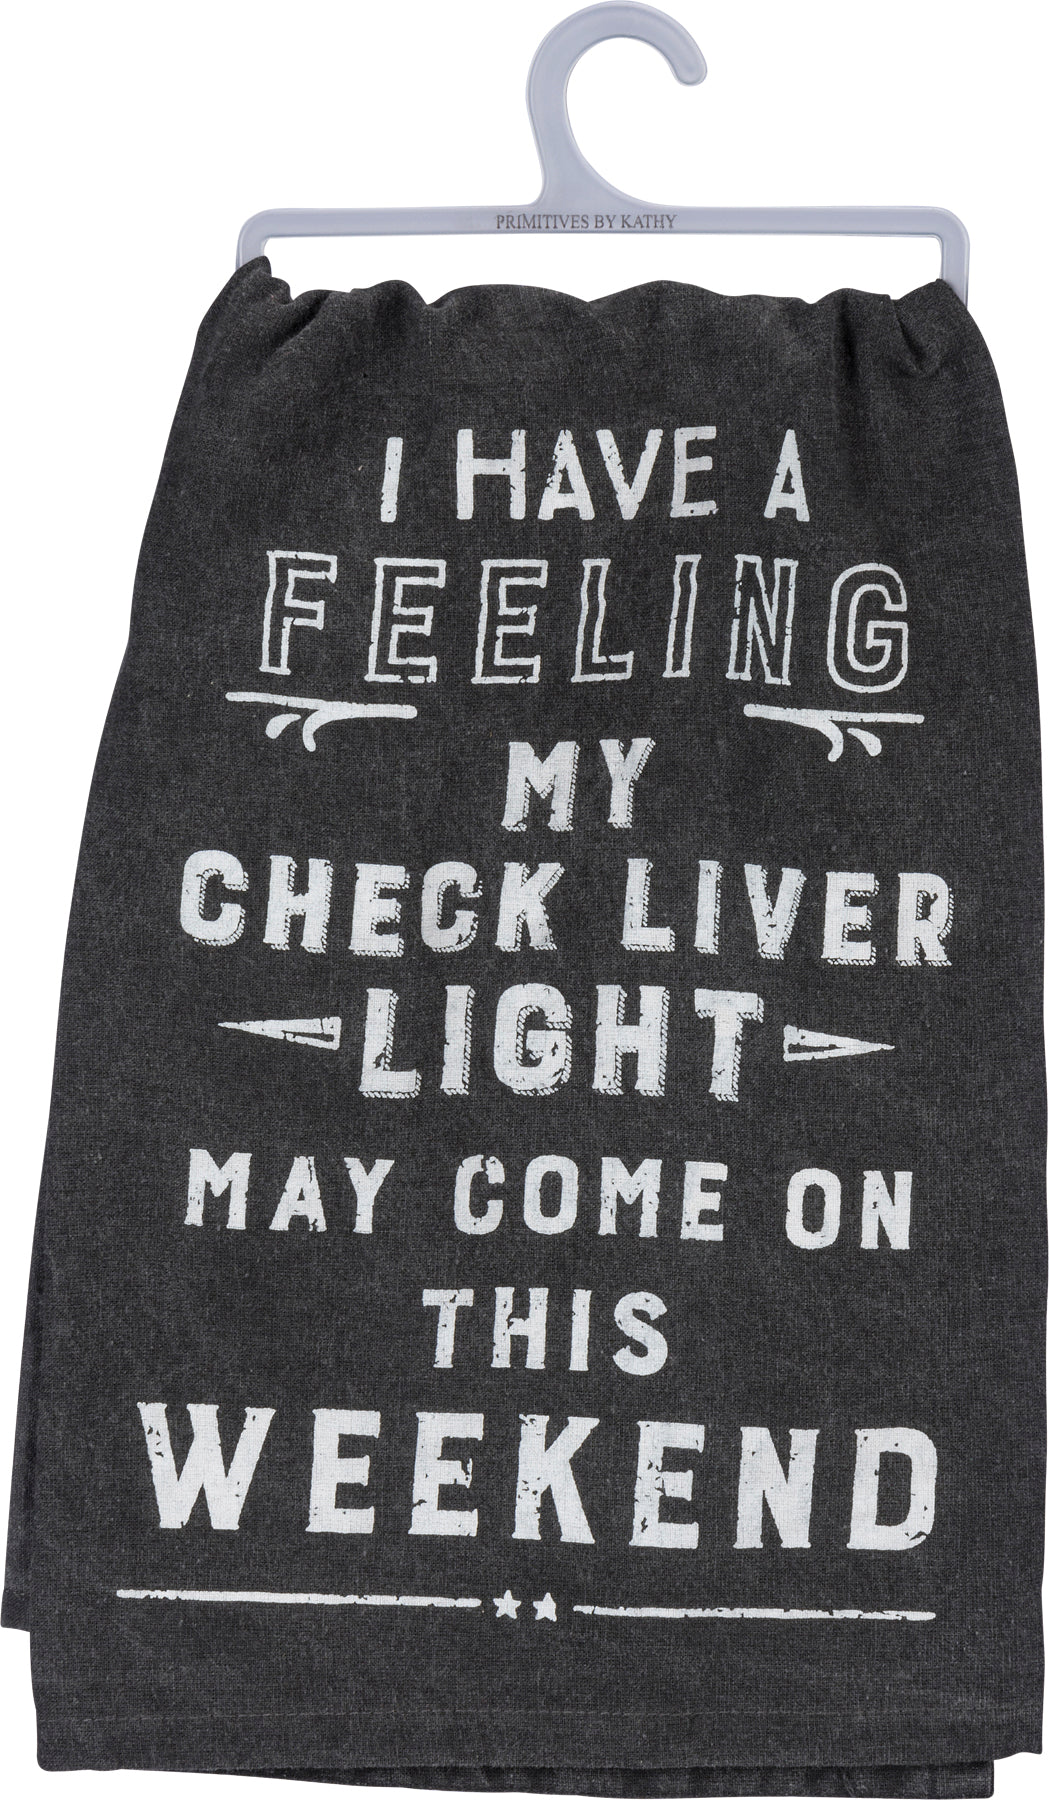 My Check Liver Light May Come On Kitchen Towel